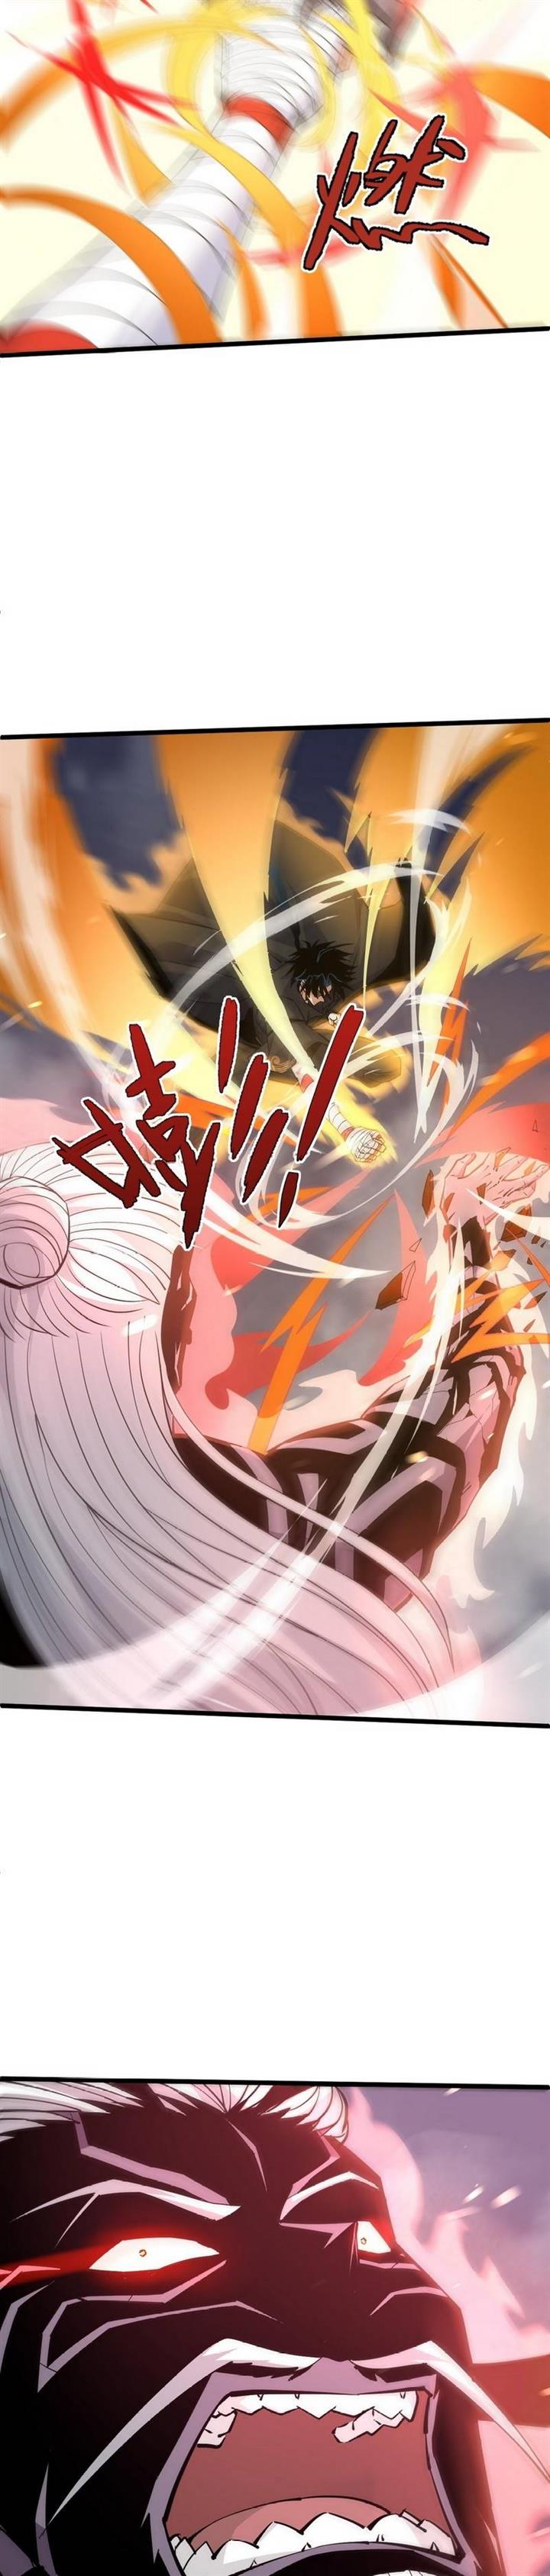 Second Fight Against the Heavens Chapter 25